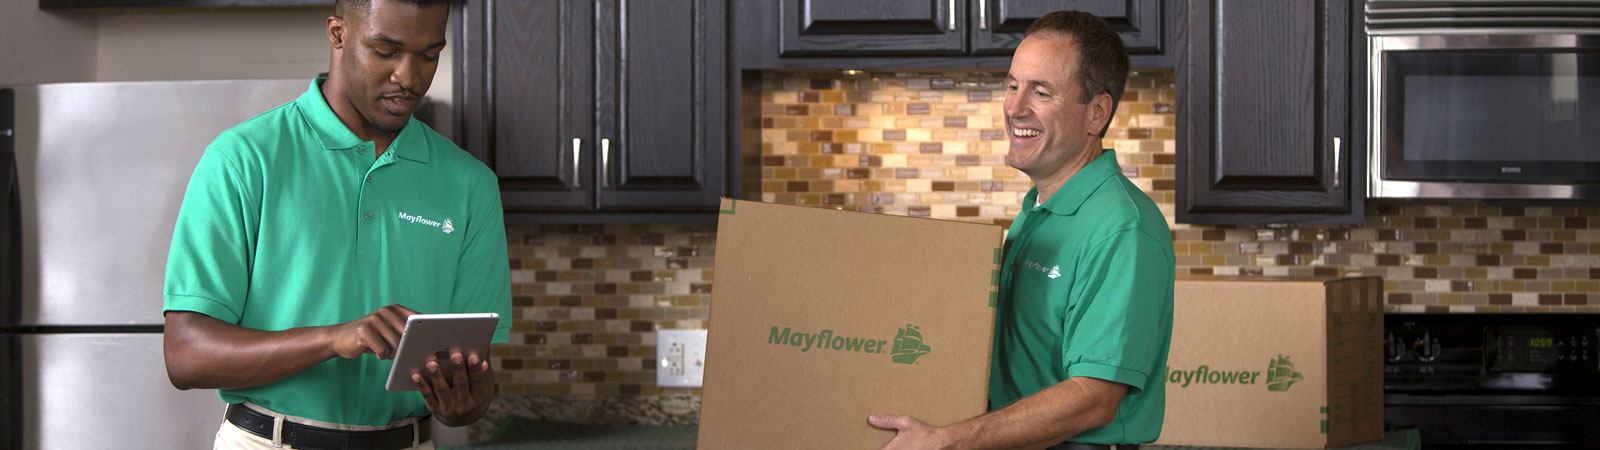 Two movers with boxes in kitchen